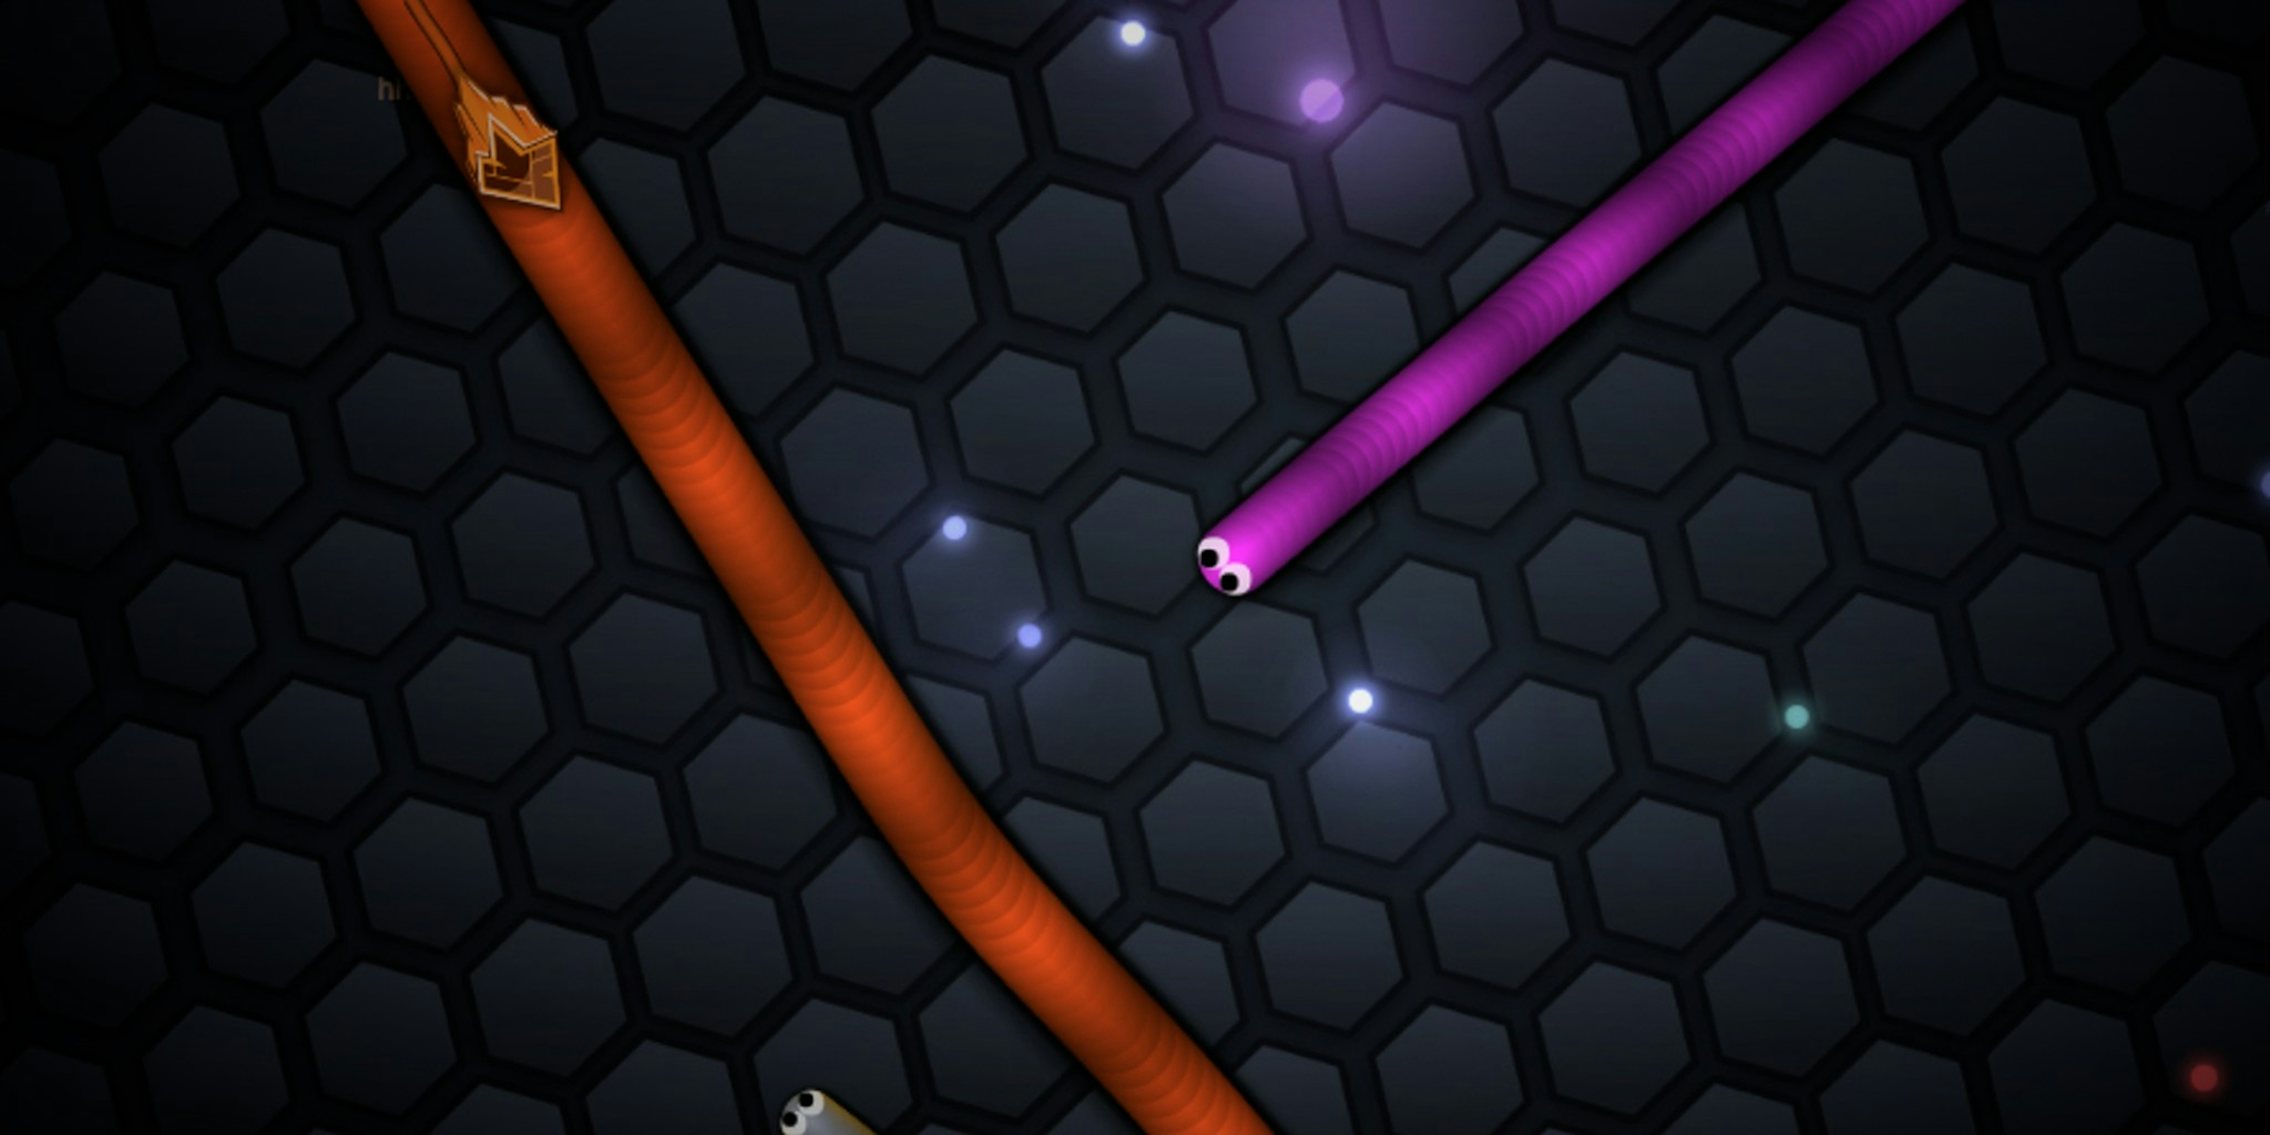 4 Ways to Become the Longest Snake in Slither.io - wikiHow